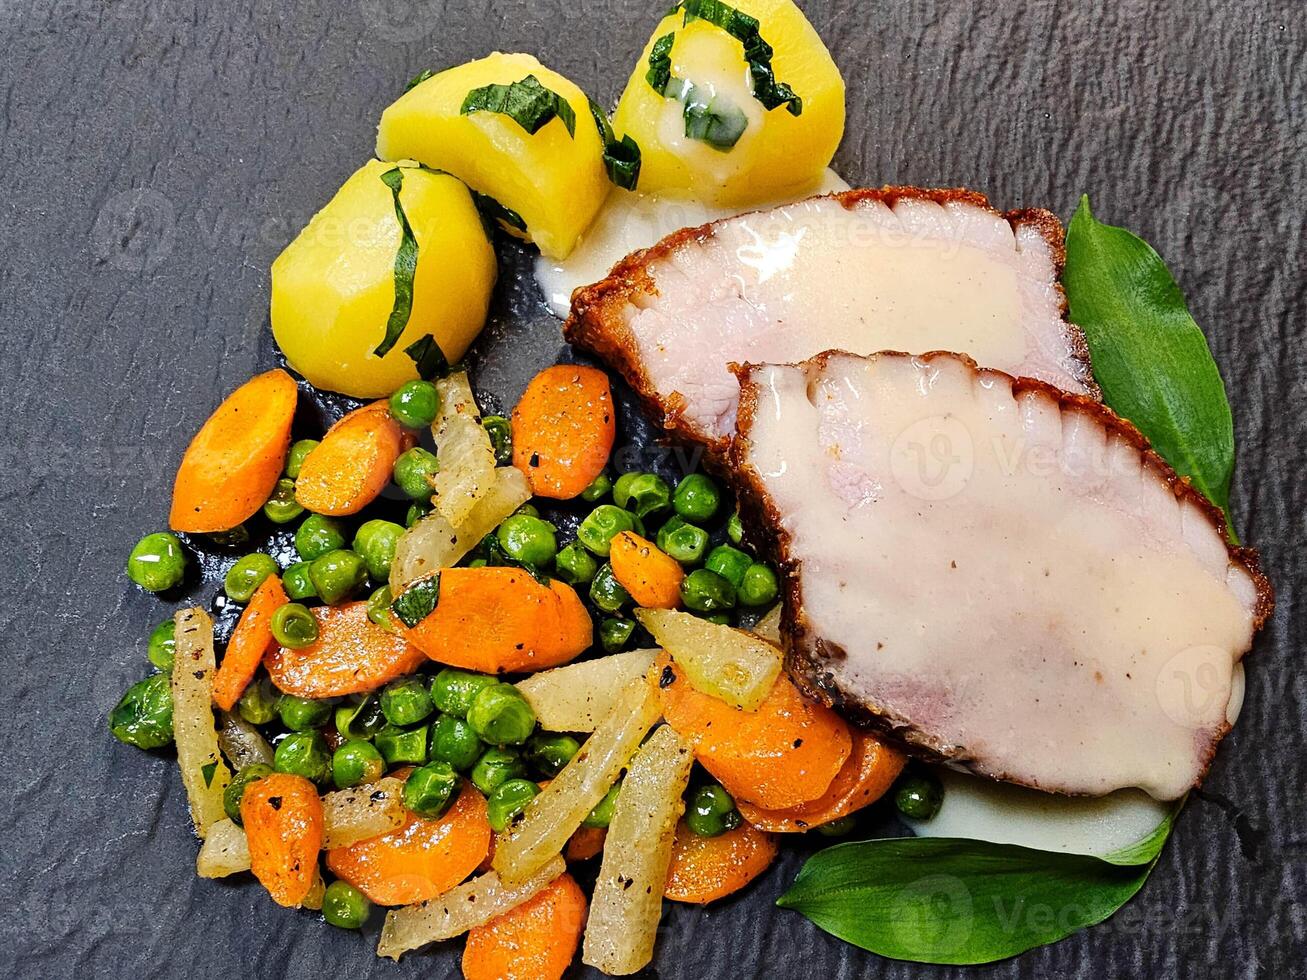 Pork Royal a traditional roast pork with vegetables and wild garlic photo